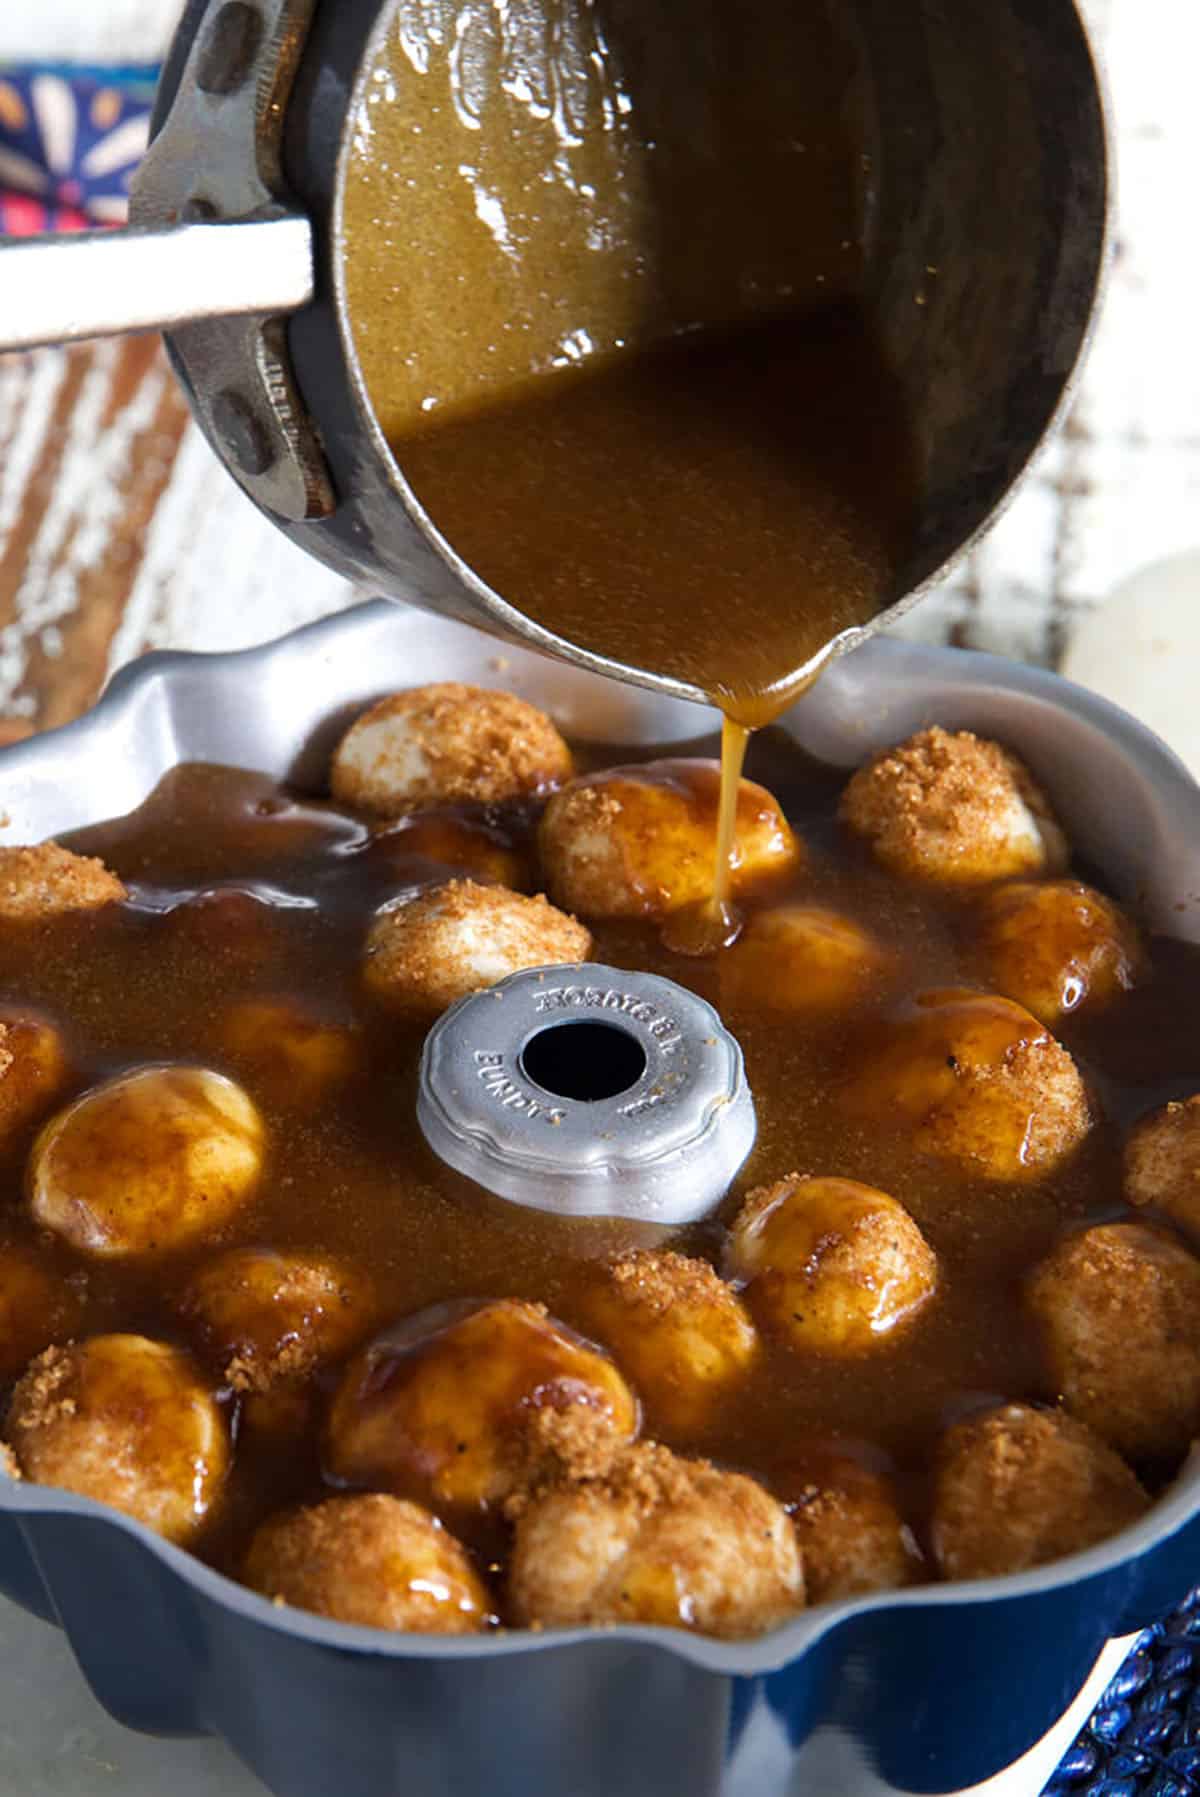 Sauce is being poured from a pot onto a ring of monkey bread.